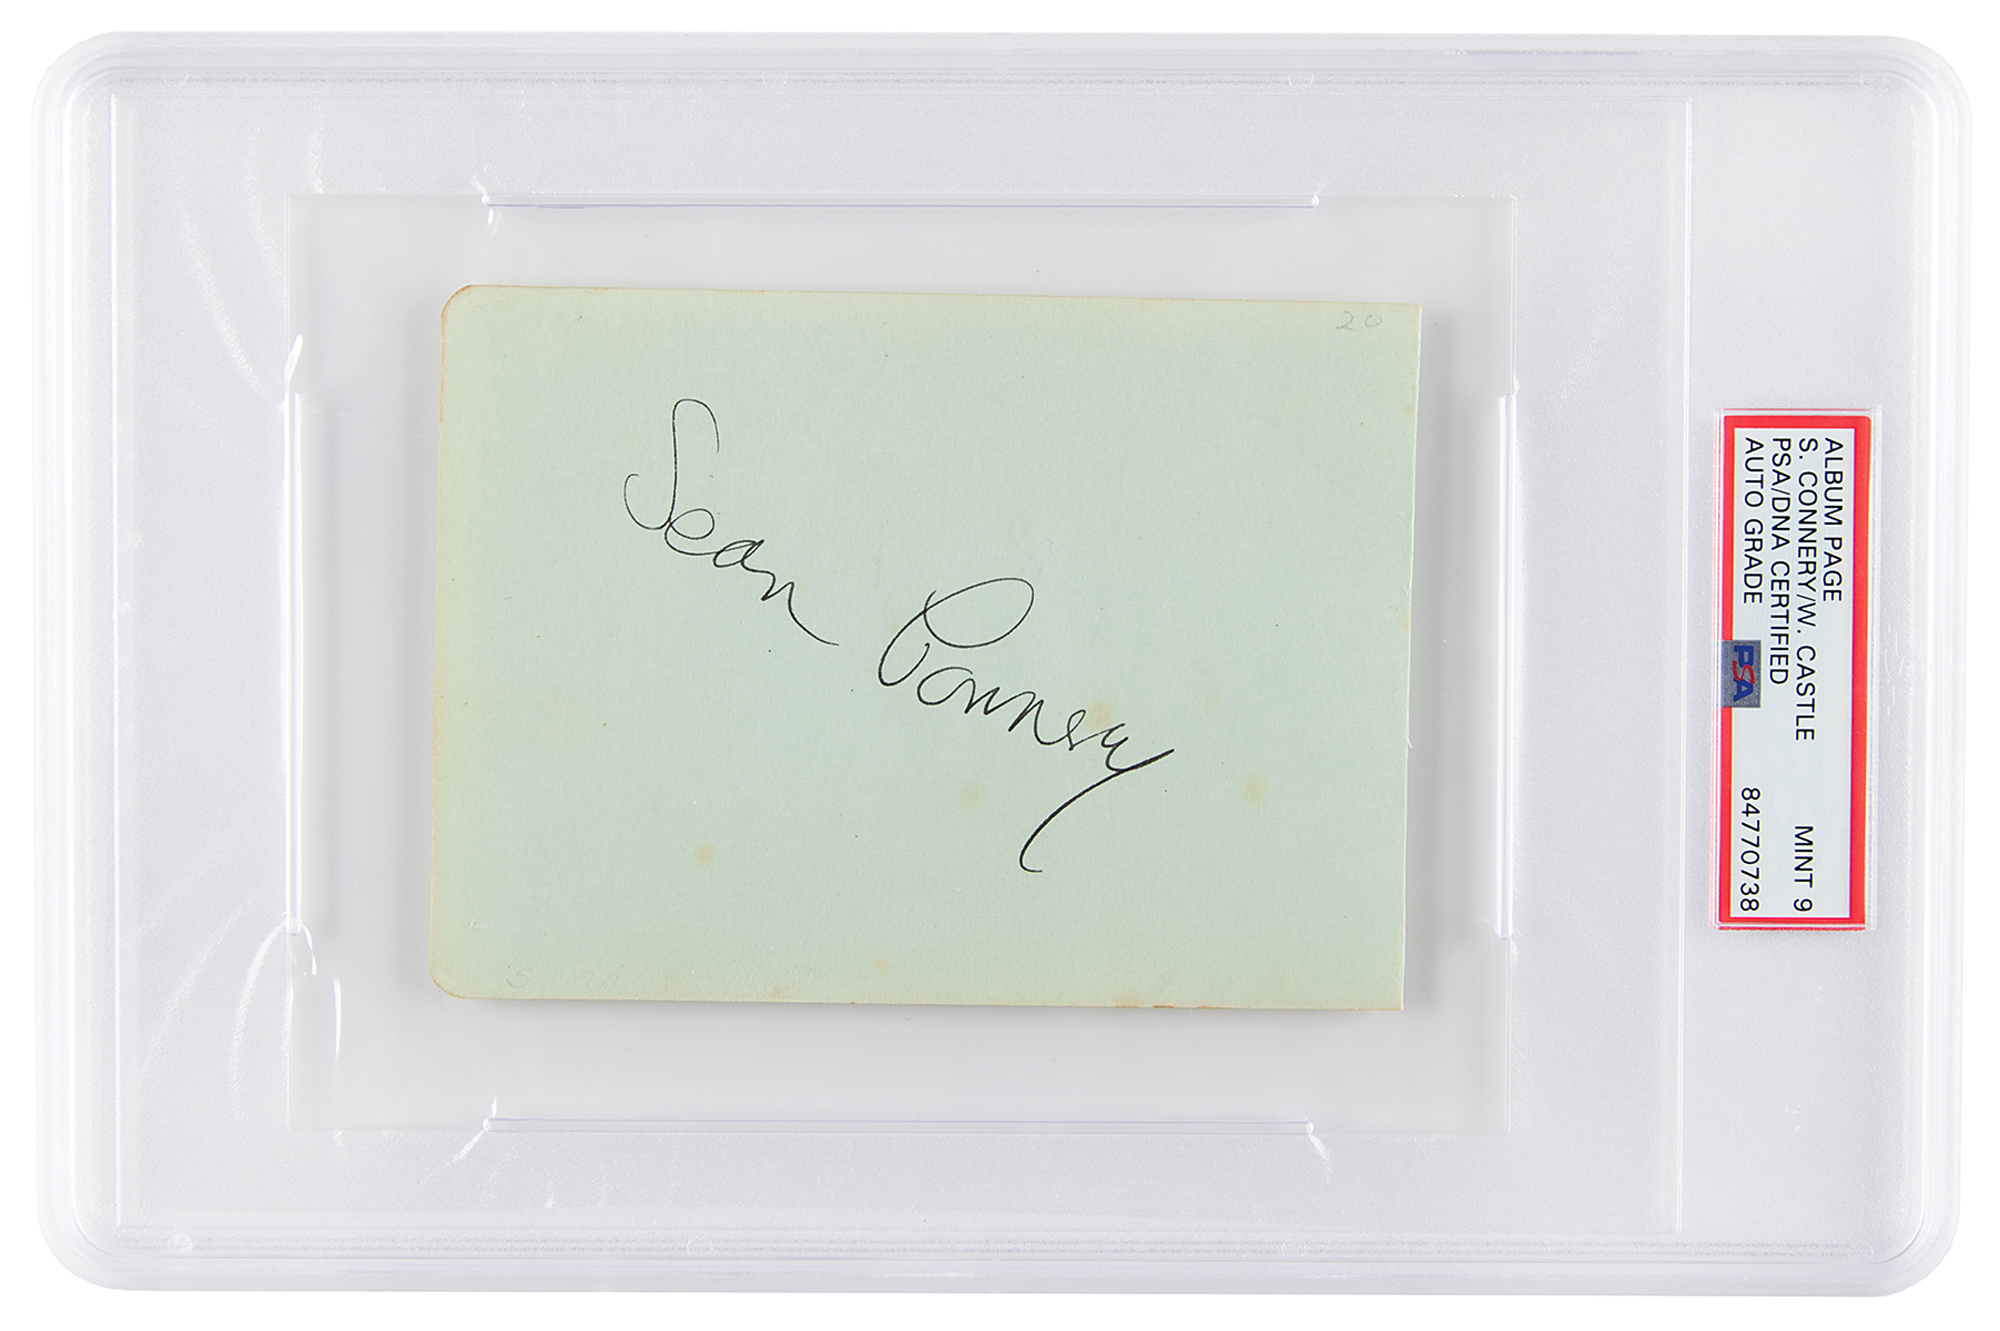 Lot #7401 Sean Connery and William Castle Signatures - PSA MINT 9